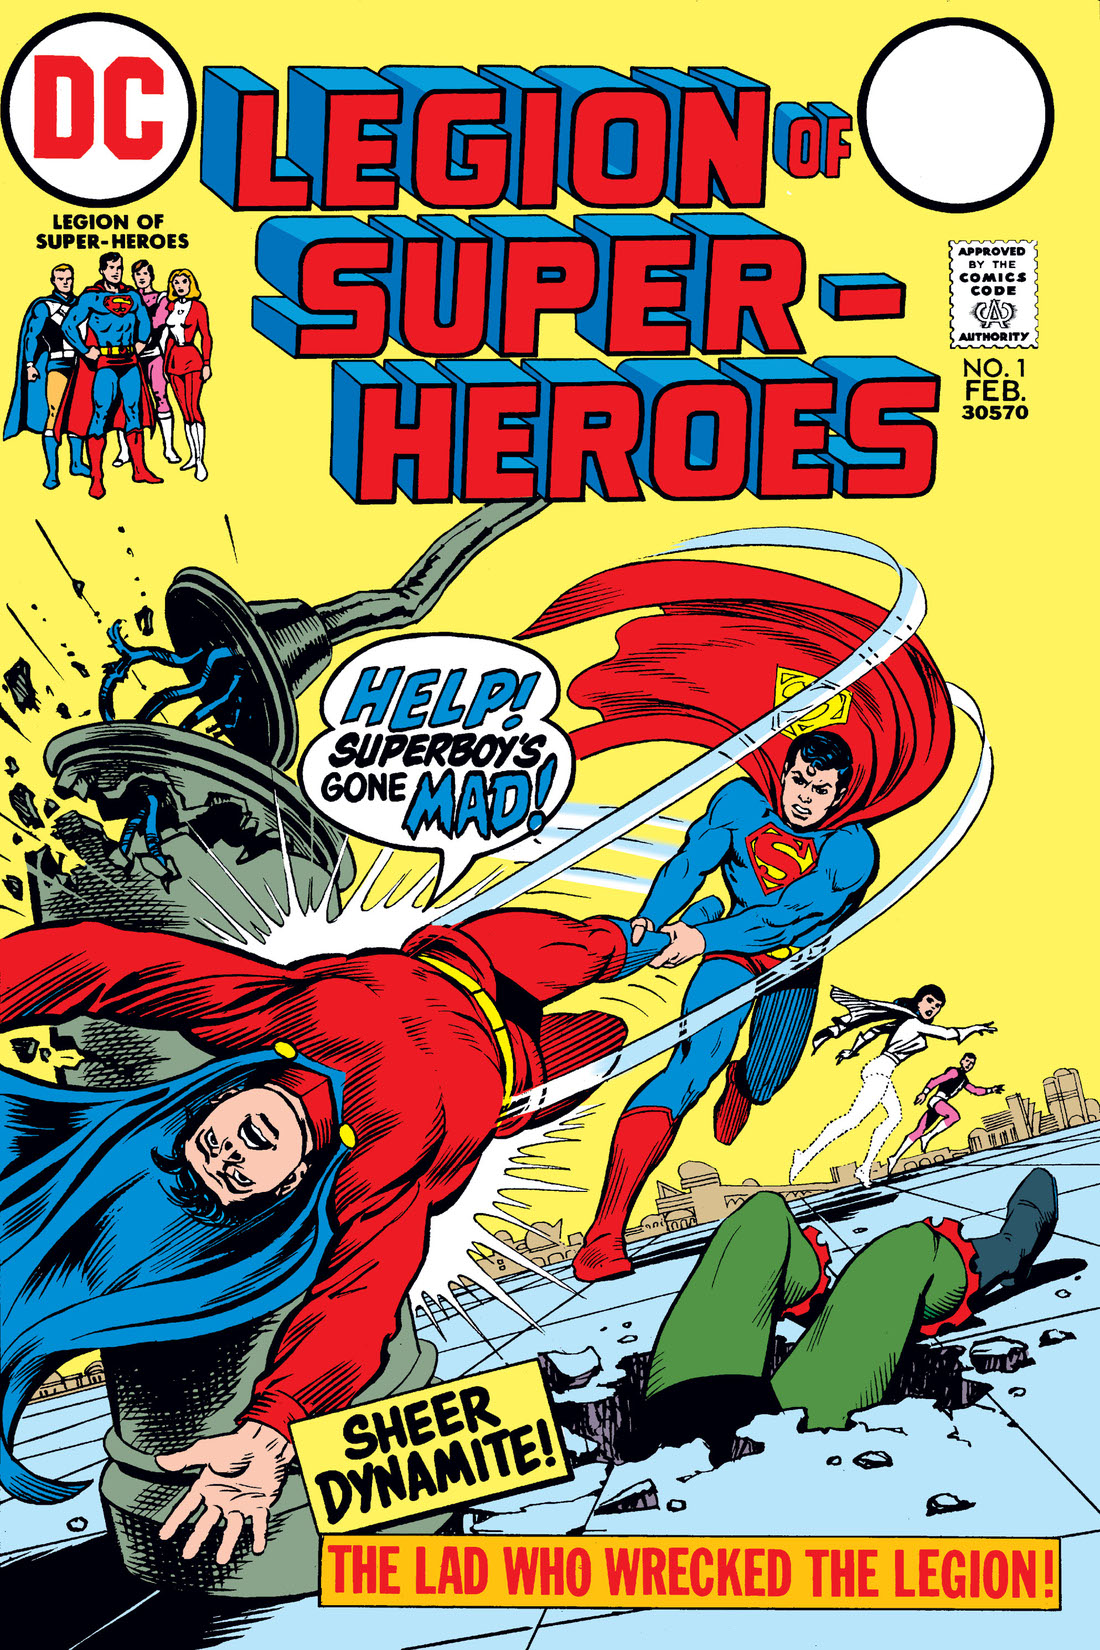 Legion of Super-Heroes (1973-1973) #1 preview images